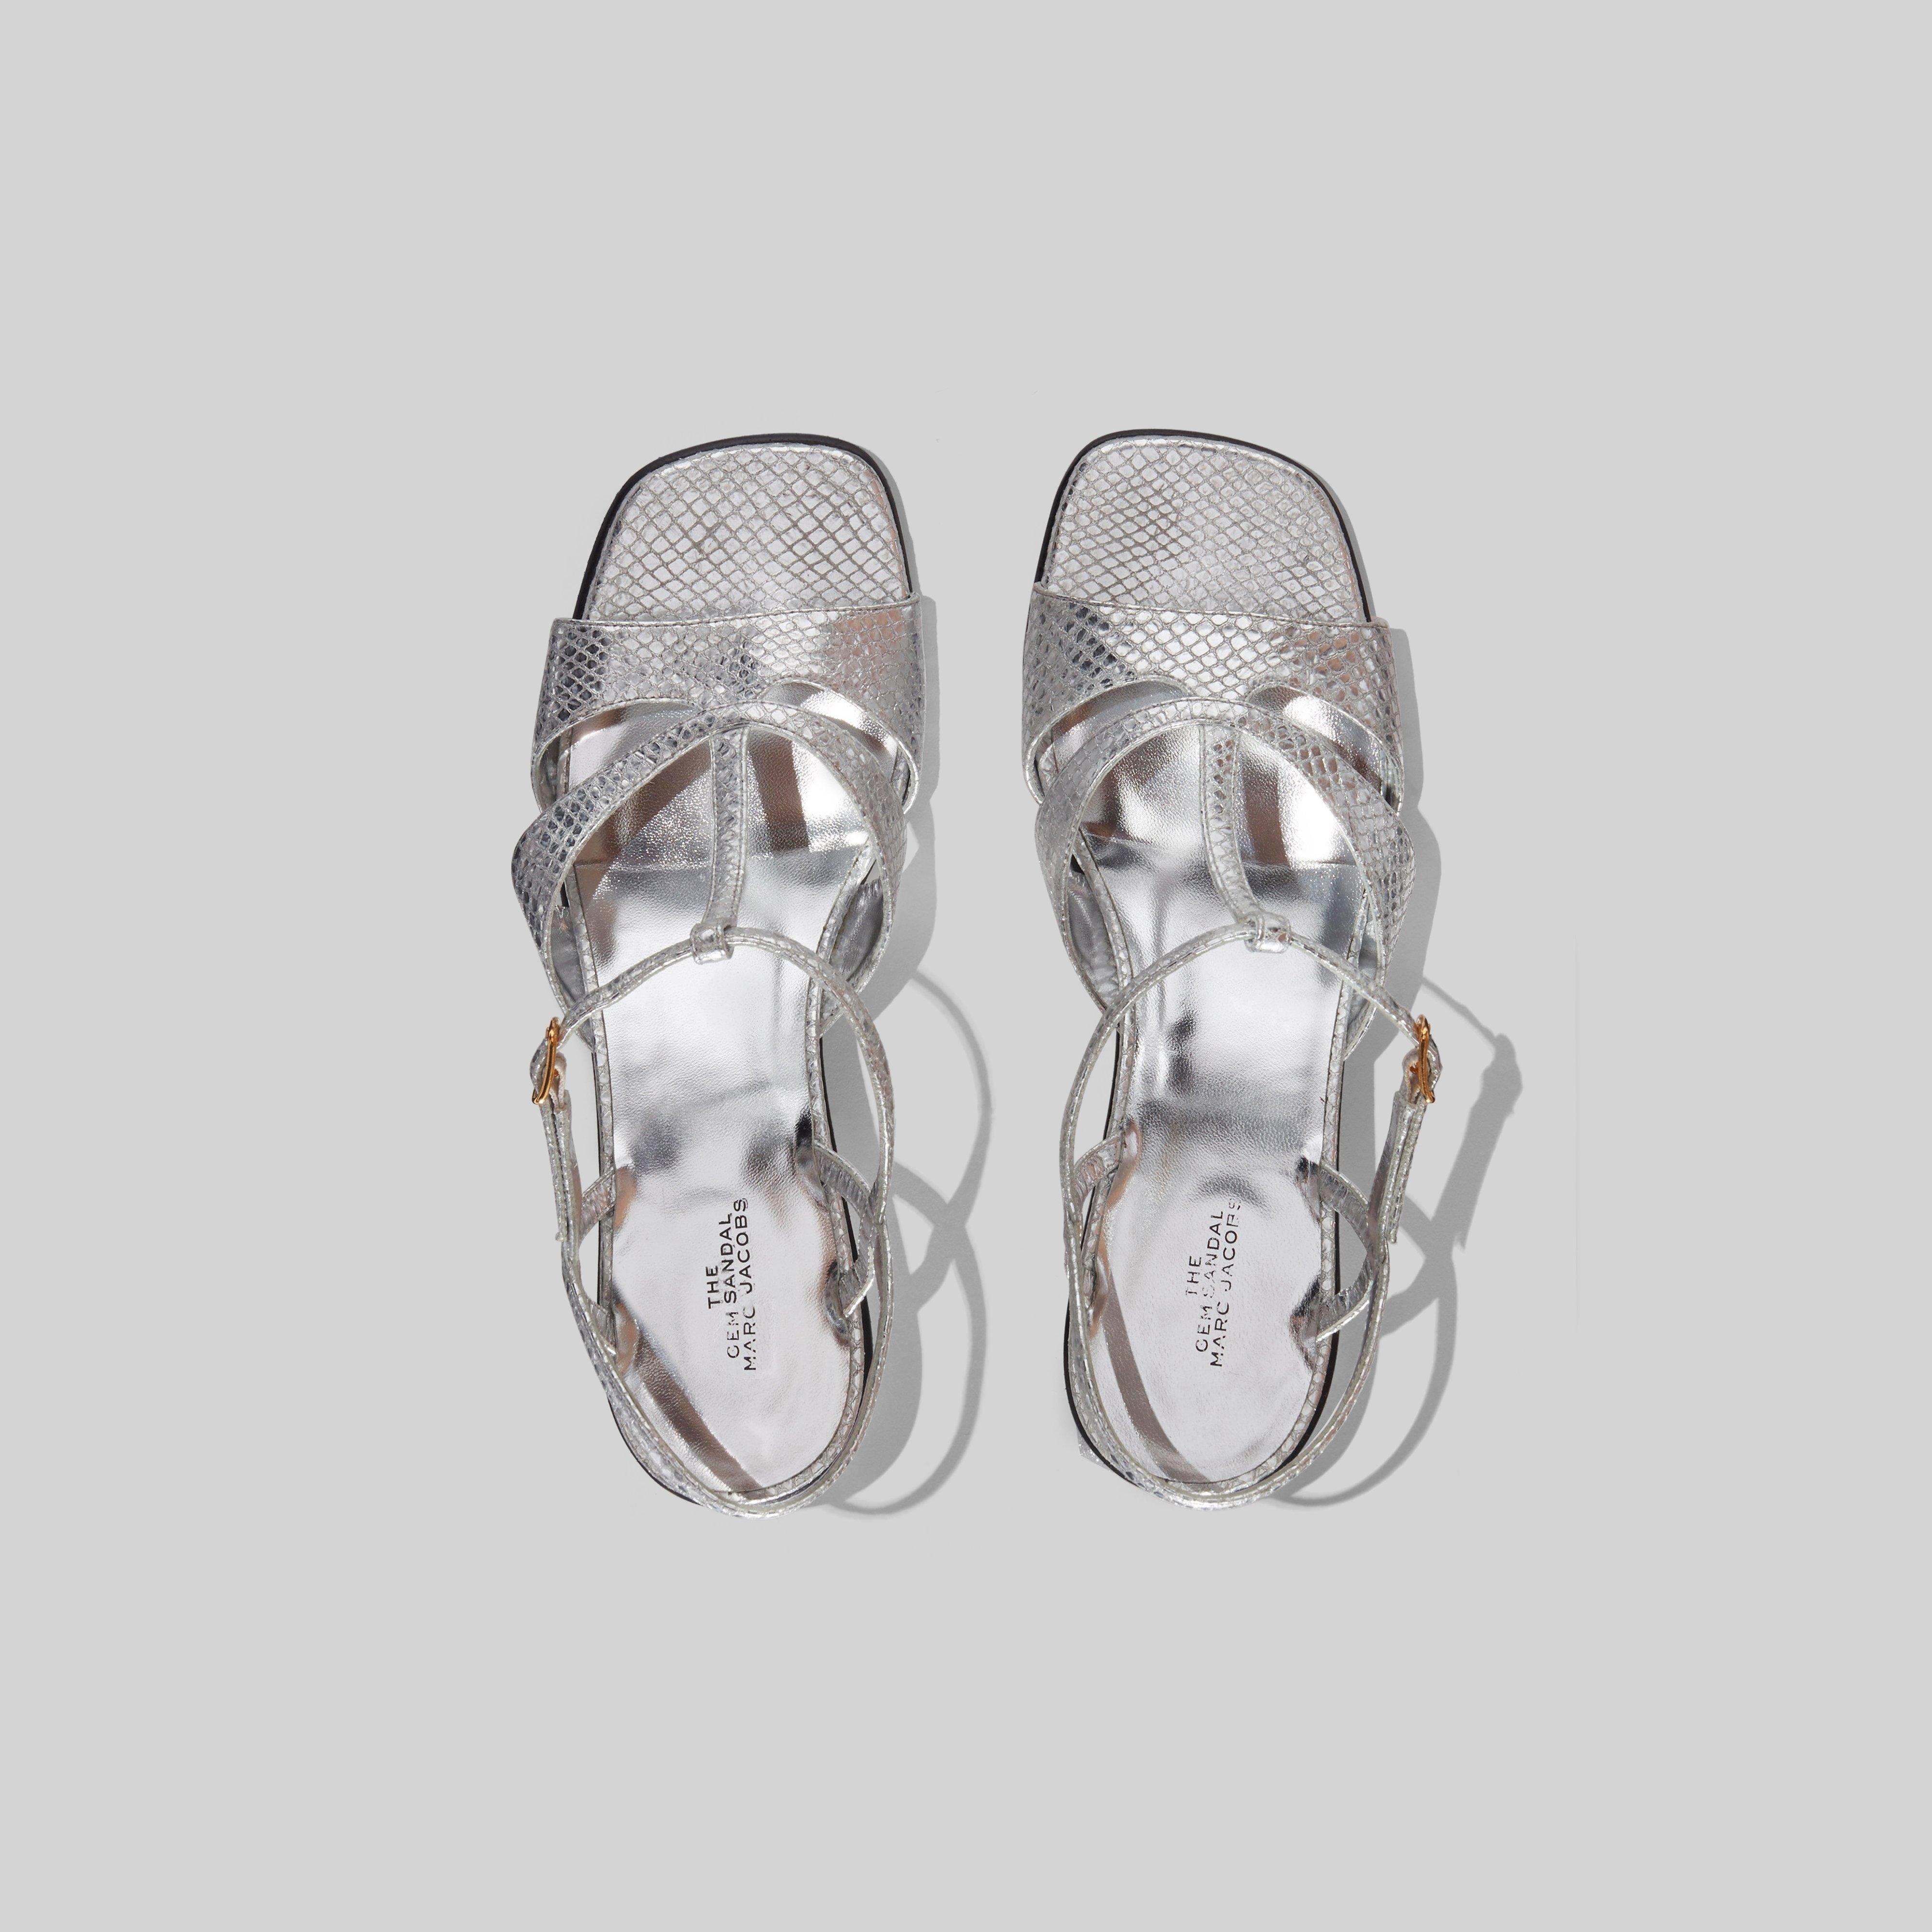 Marc Jacobs Leather The Gem Sandal 40 Mm in Silver (Metallic) | Lyst